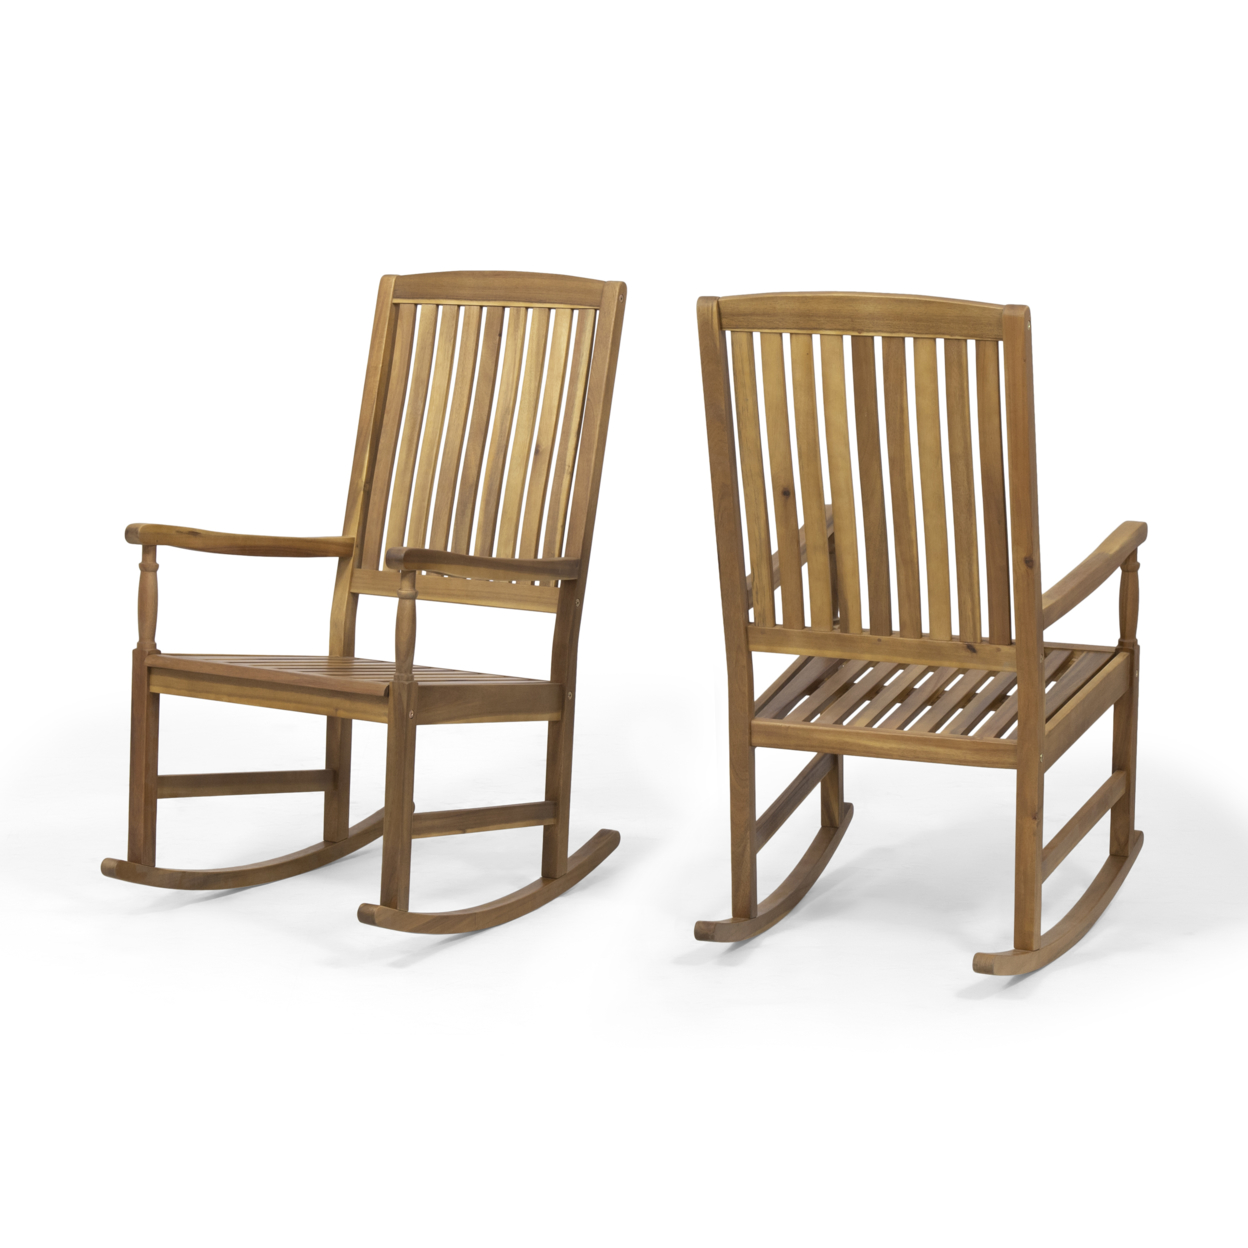 Penny Outdoor Acacia Wood Rocking Chairs (Set Of 2) - Gray Finish